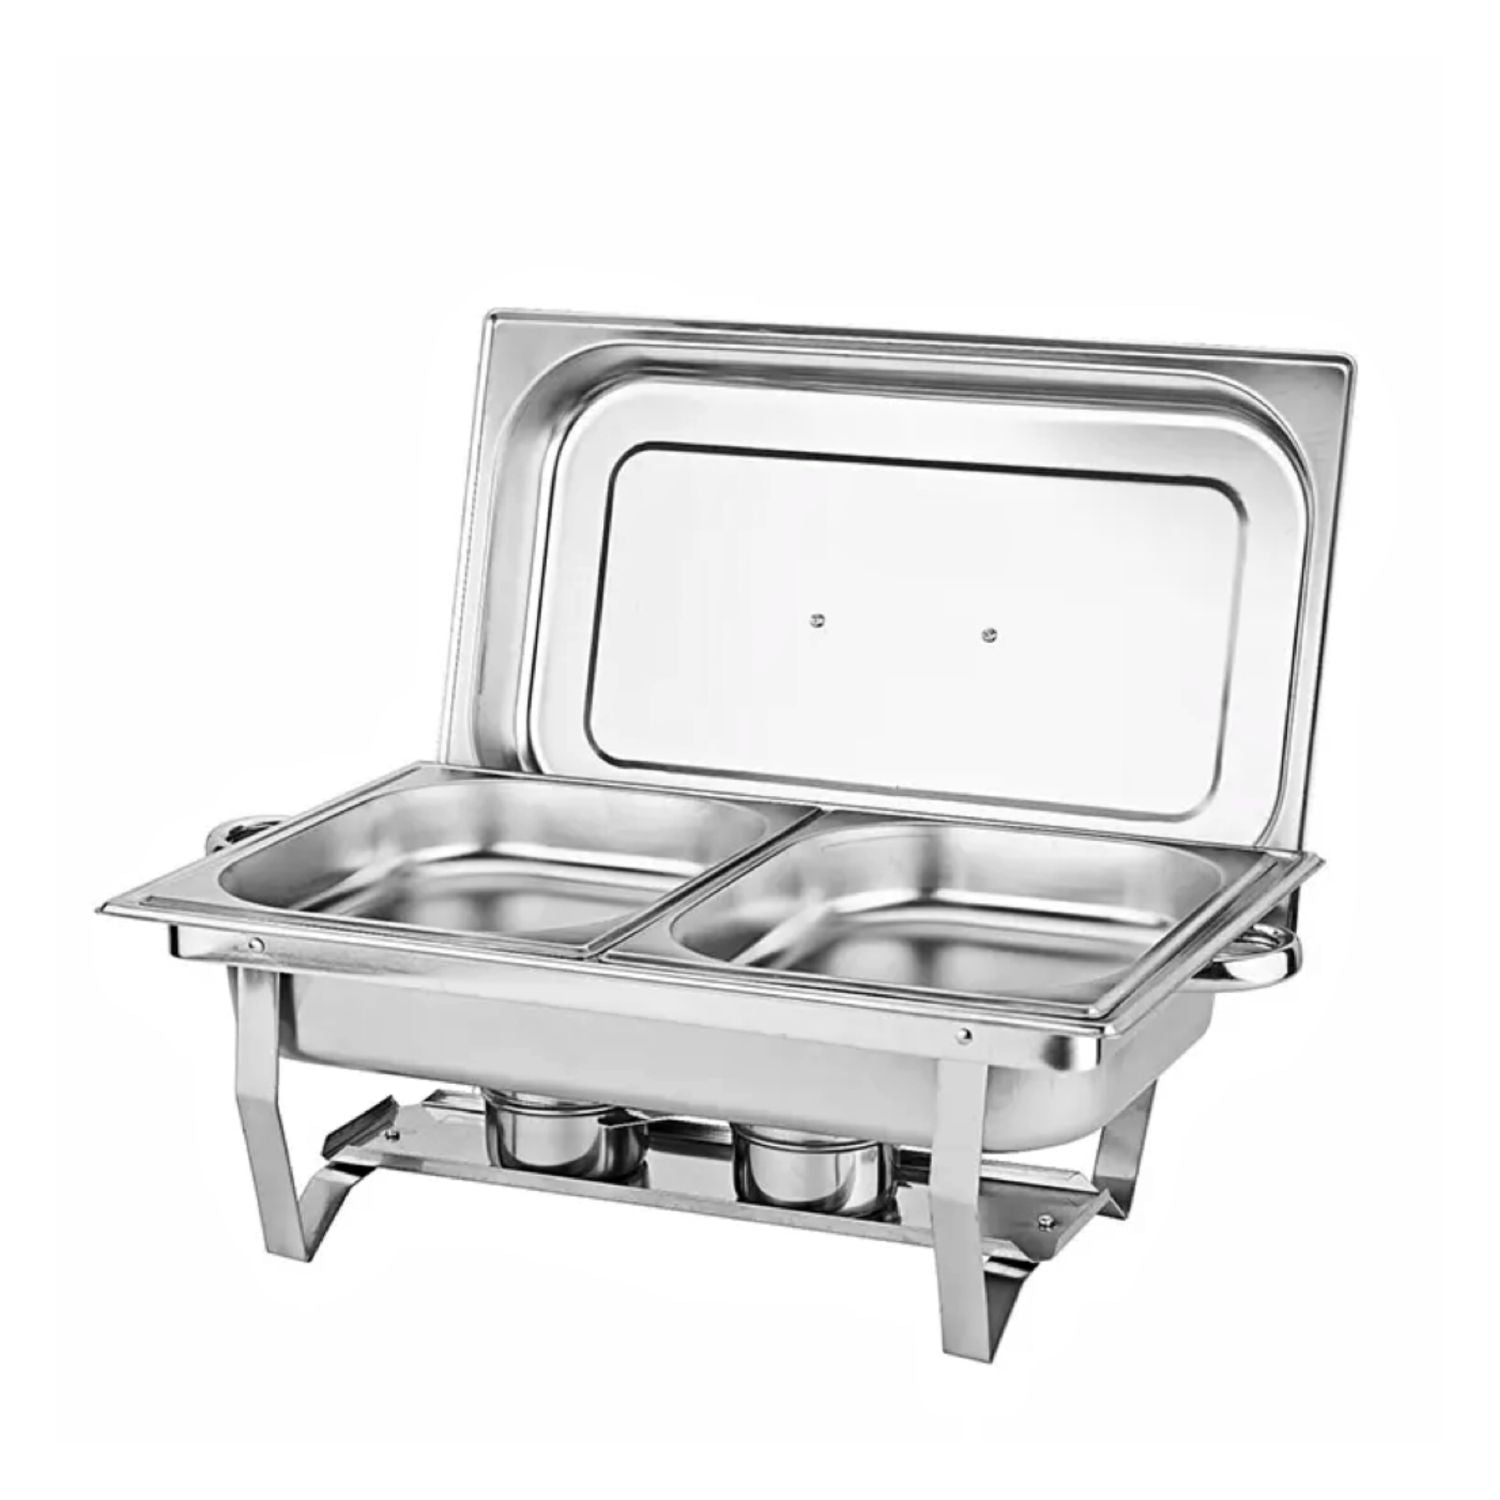 GOMINIMO 9L Chafing Dish Stainless Steel Food Buffet Warmer Pan (2x4.5L Dual Trays)